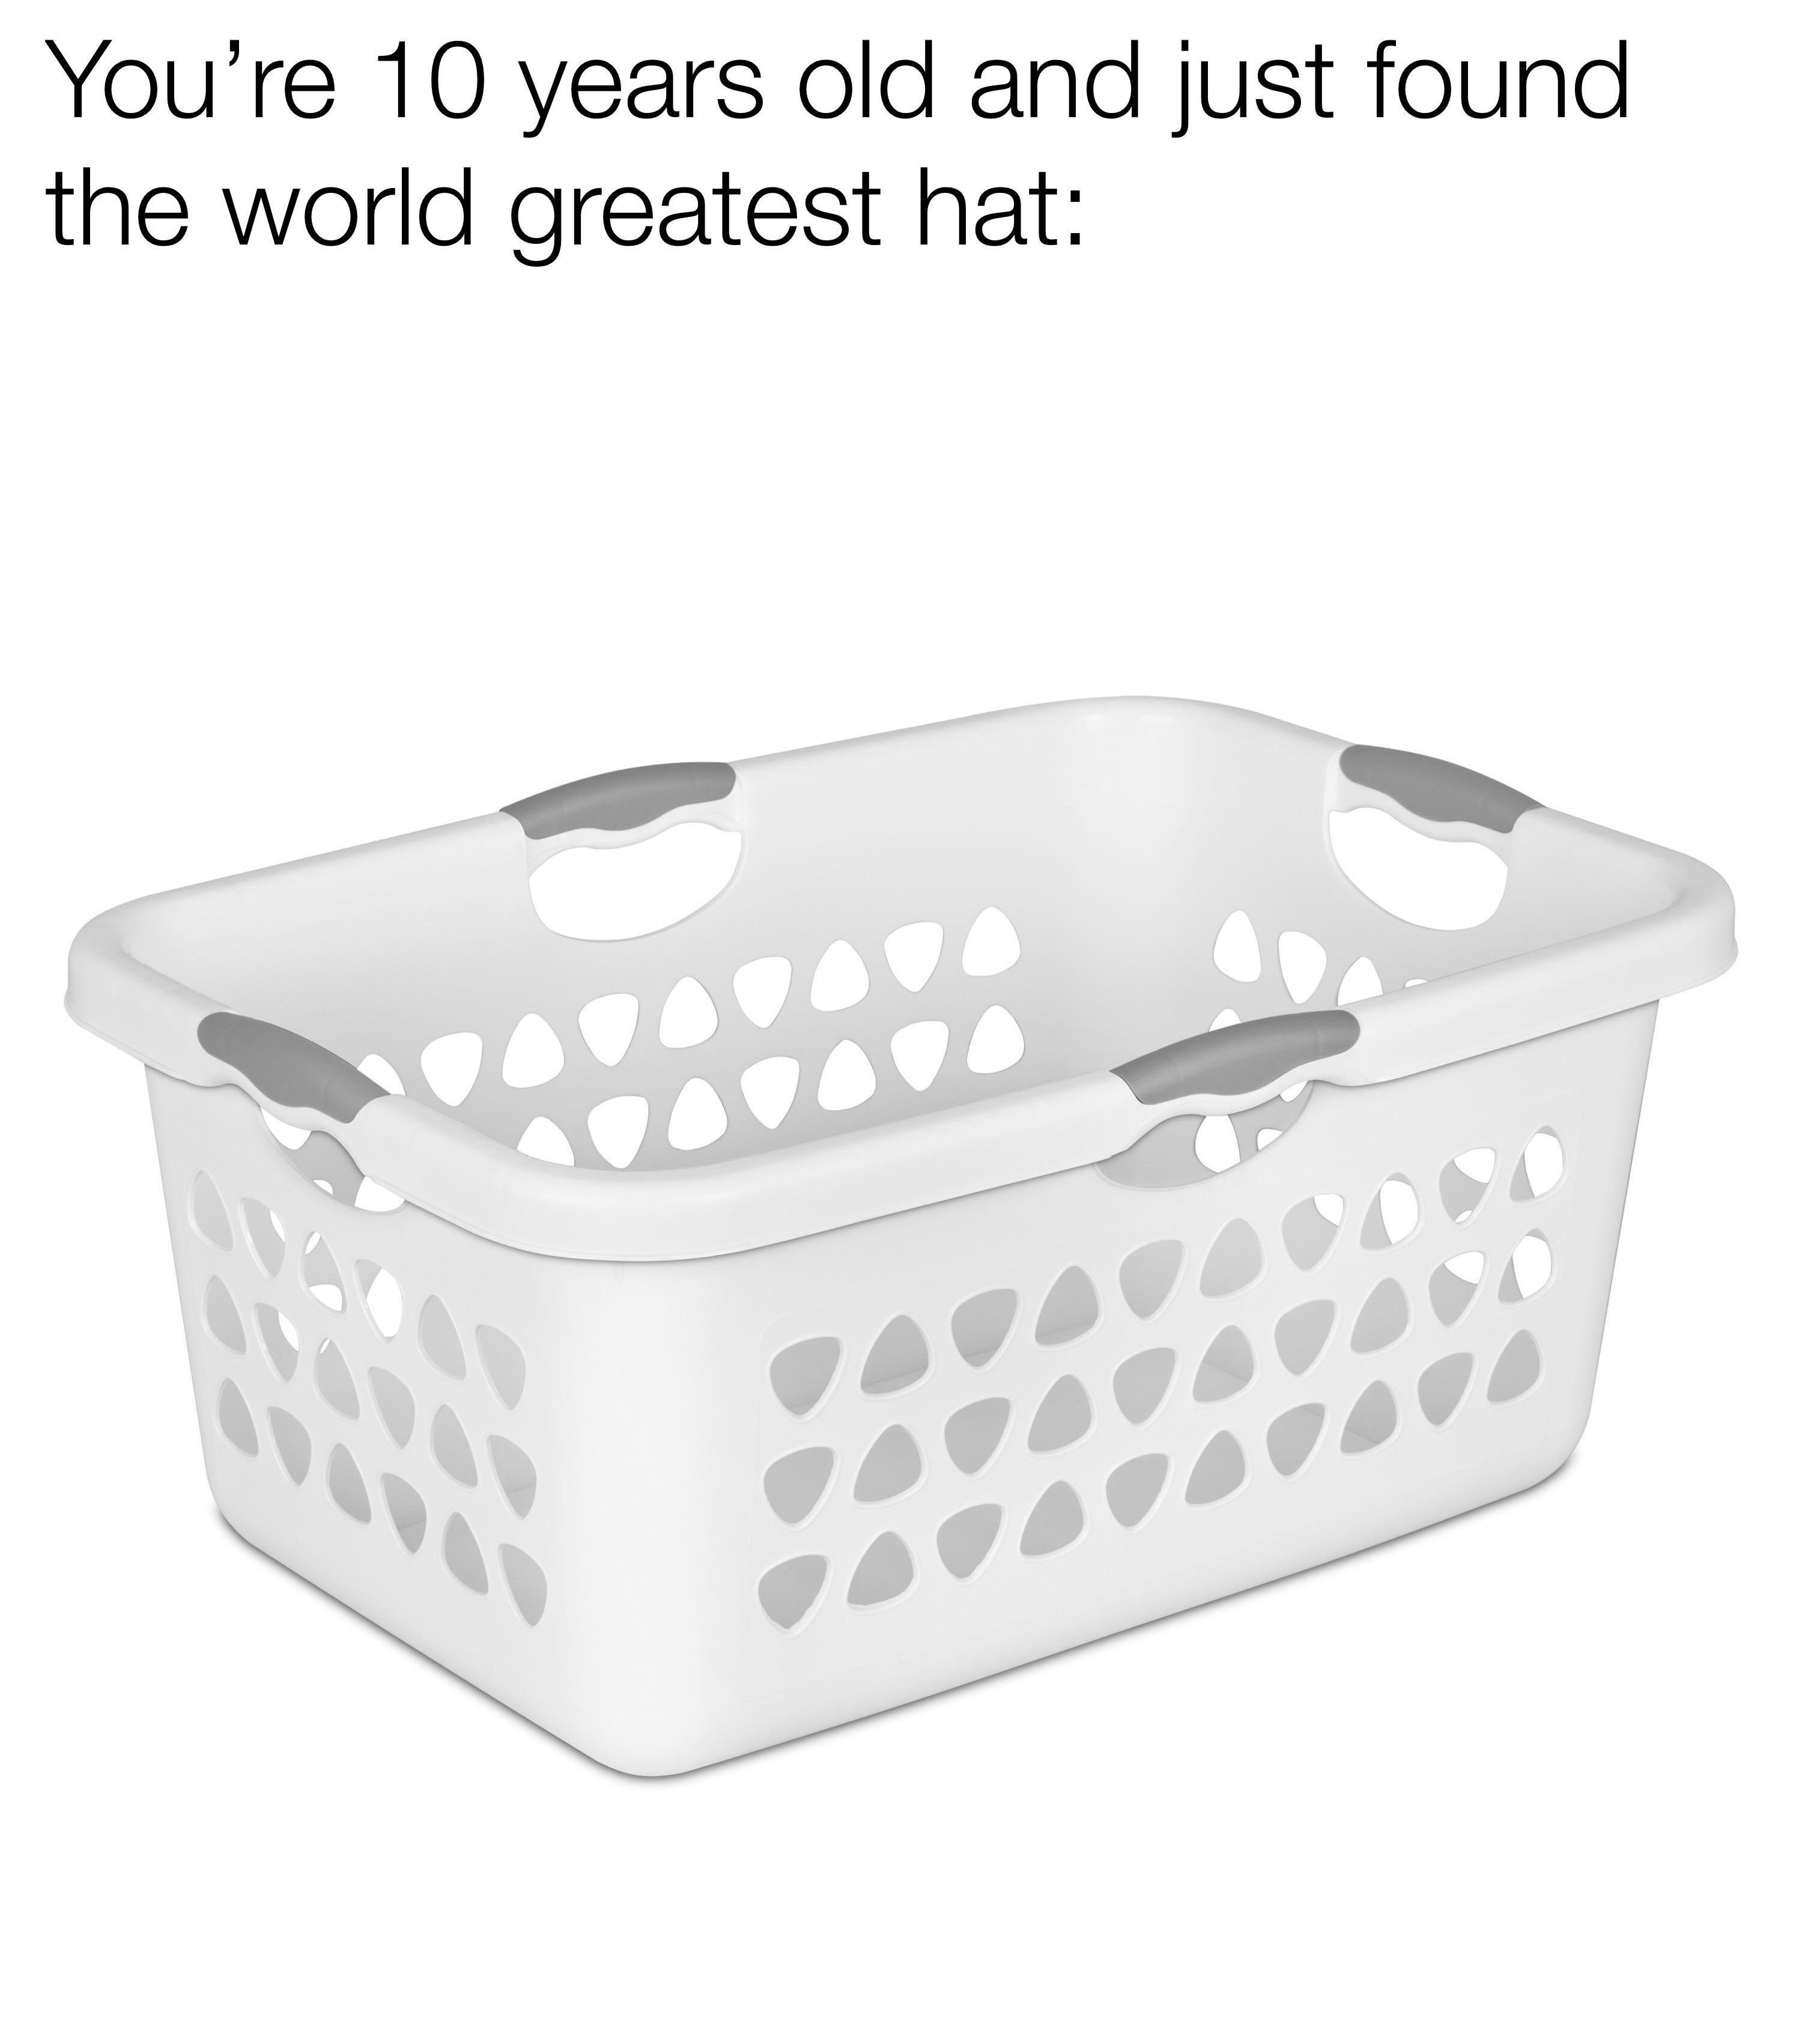 clothes basket - You're 10 years old and just found the world greatest hat 1000